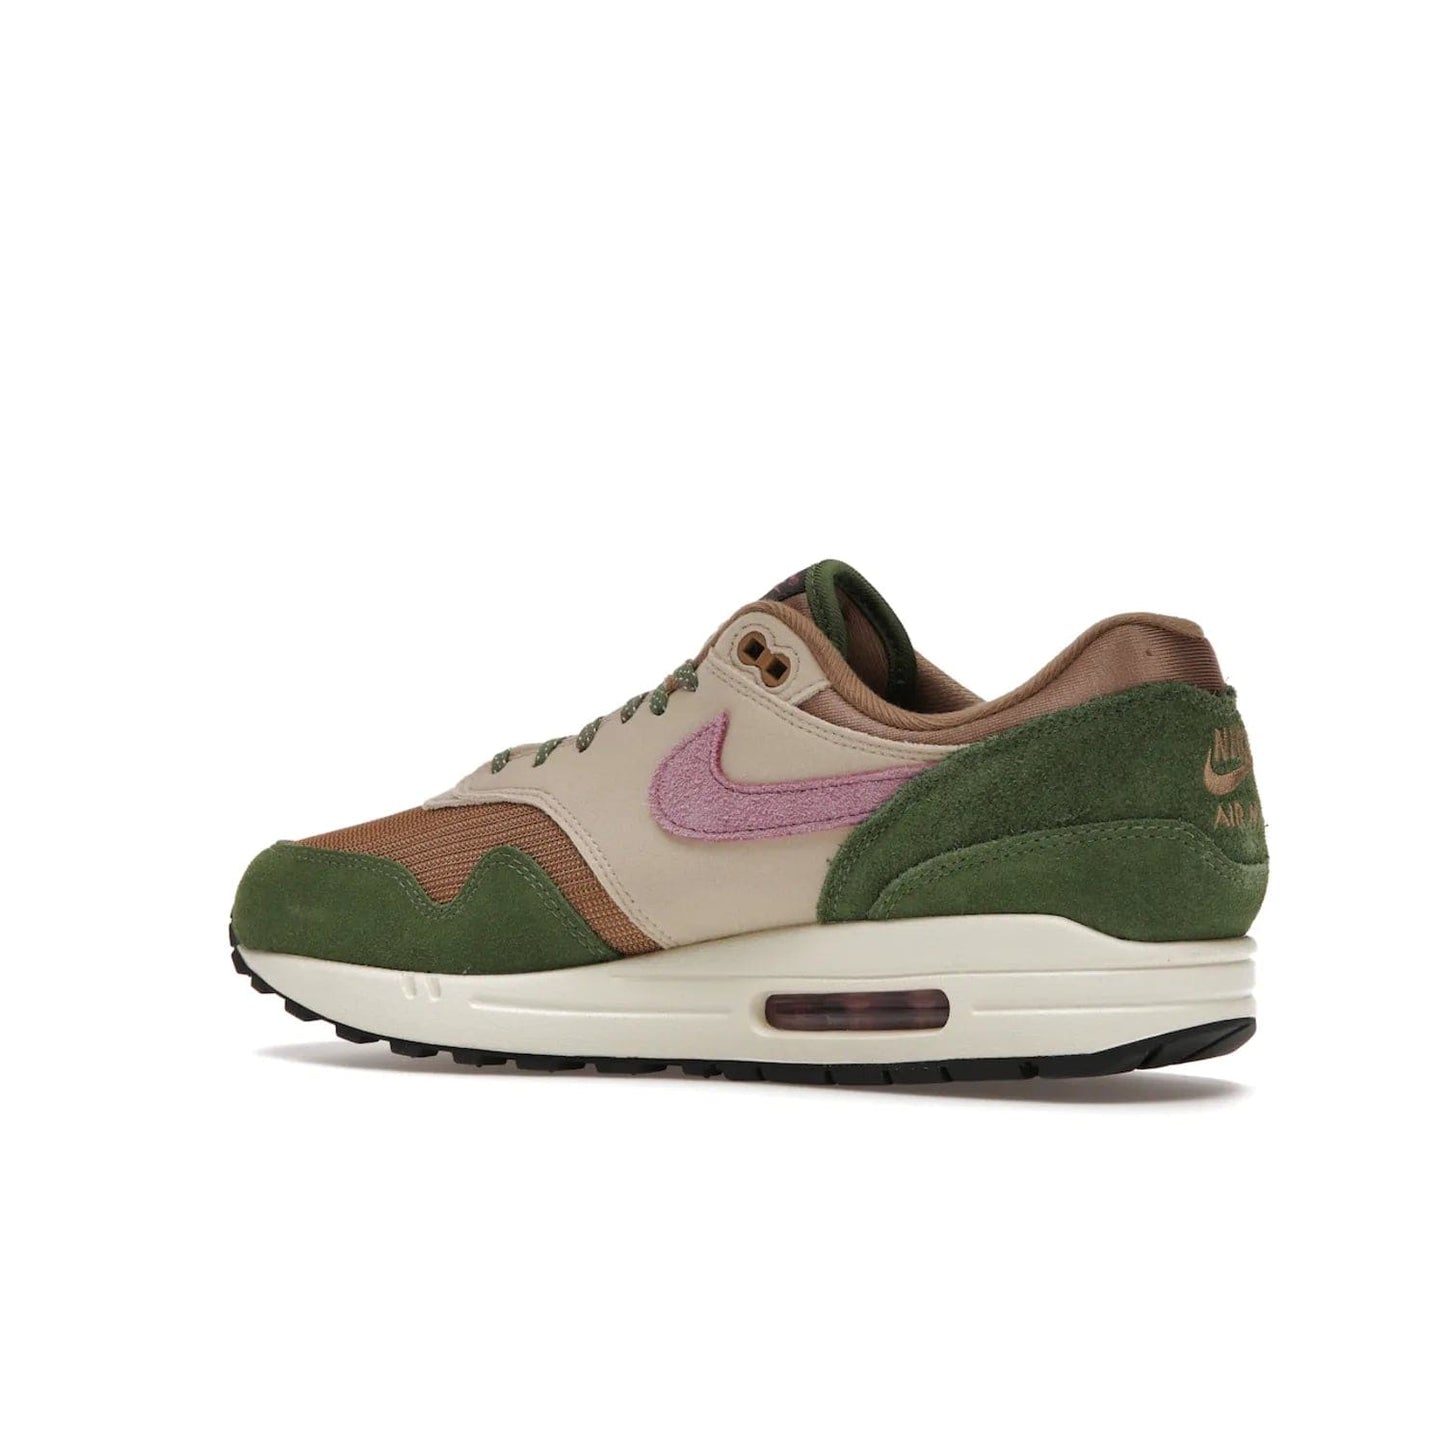 Nike Air Max 1 SH Treeline - Image 22 - Only at www.BallersClubKickz.com - A classic Nike Air Max 1 SH Treeline with a brown mesh upper, taupe Durabuck overlays, and hairy green suede details. Light Bordeaux Swoosh and woven tongue label for a pop of color. Released in May 2022. Perfect for any outfit and sure to impress.